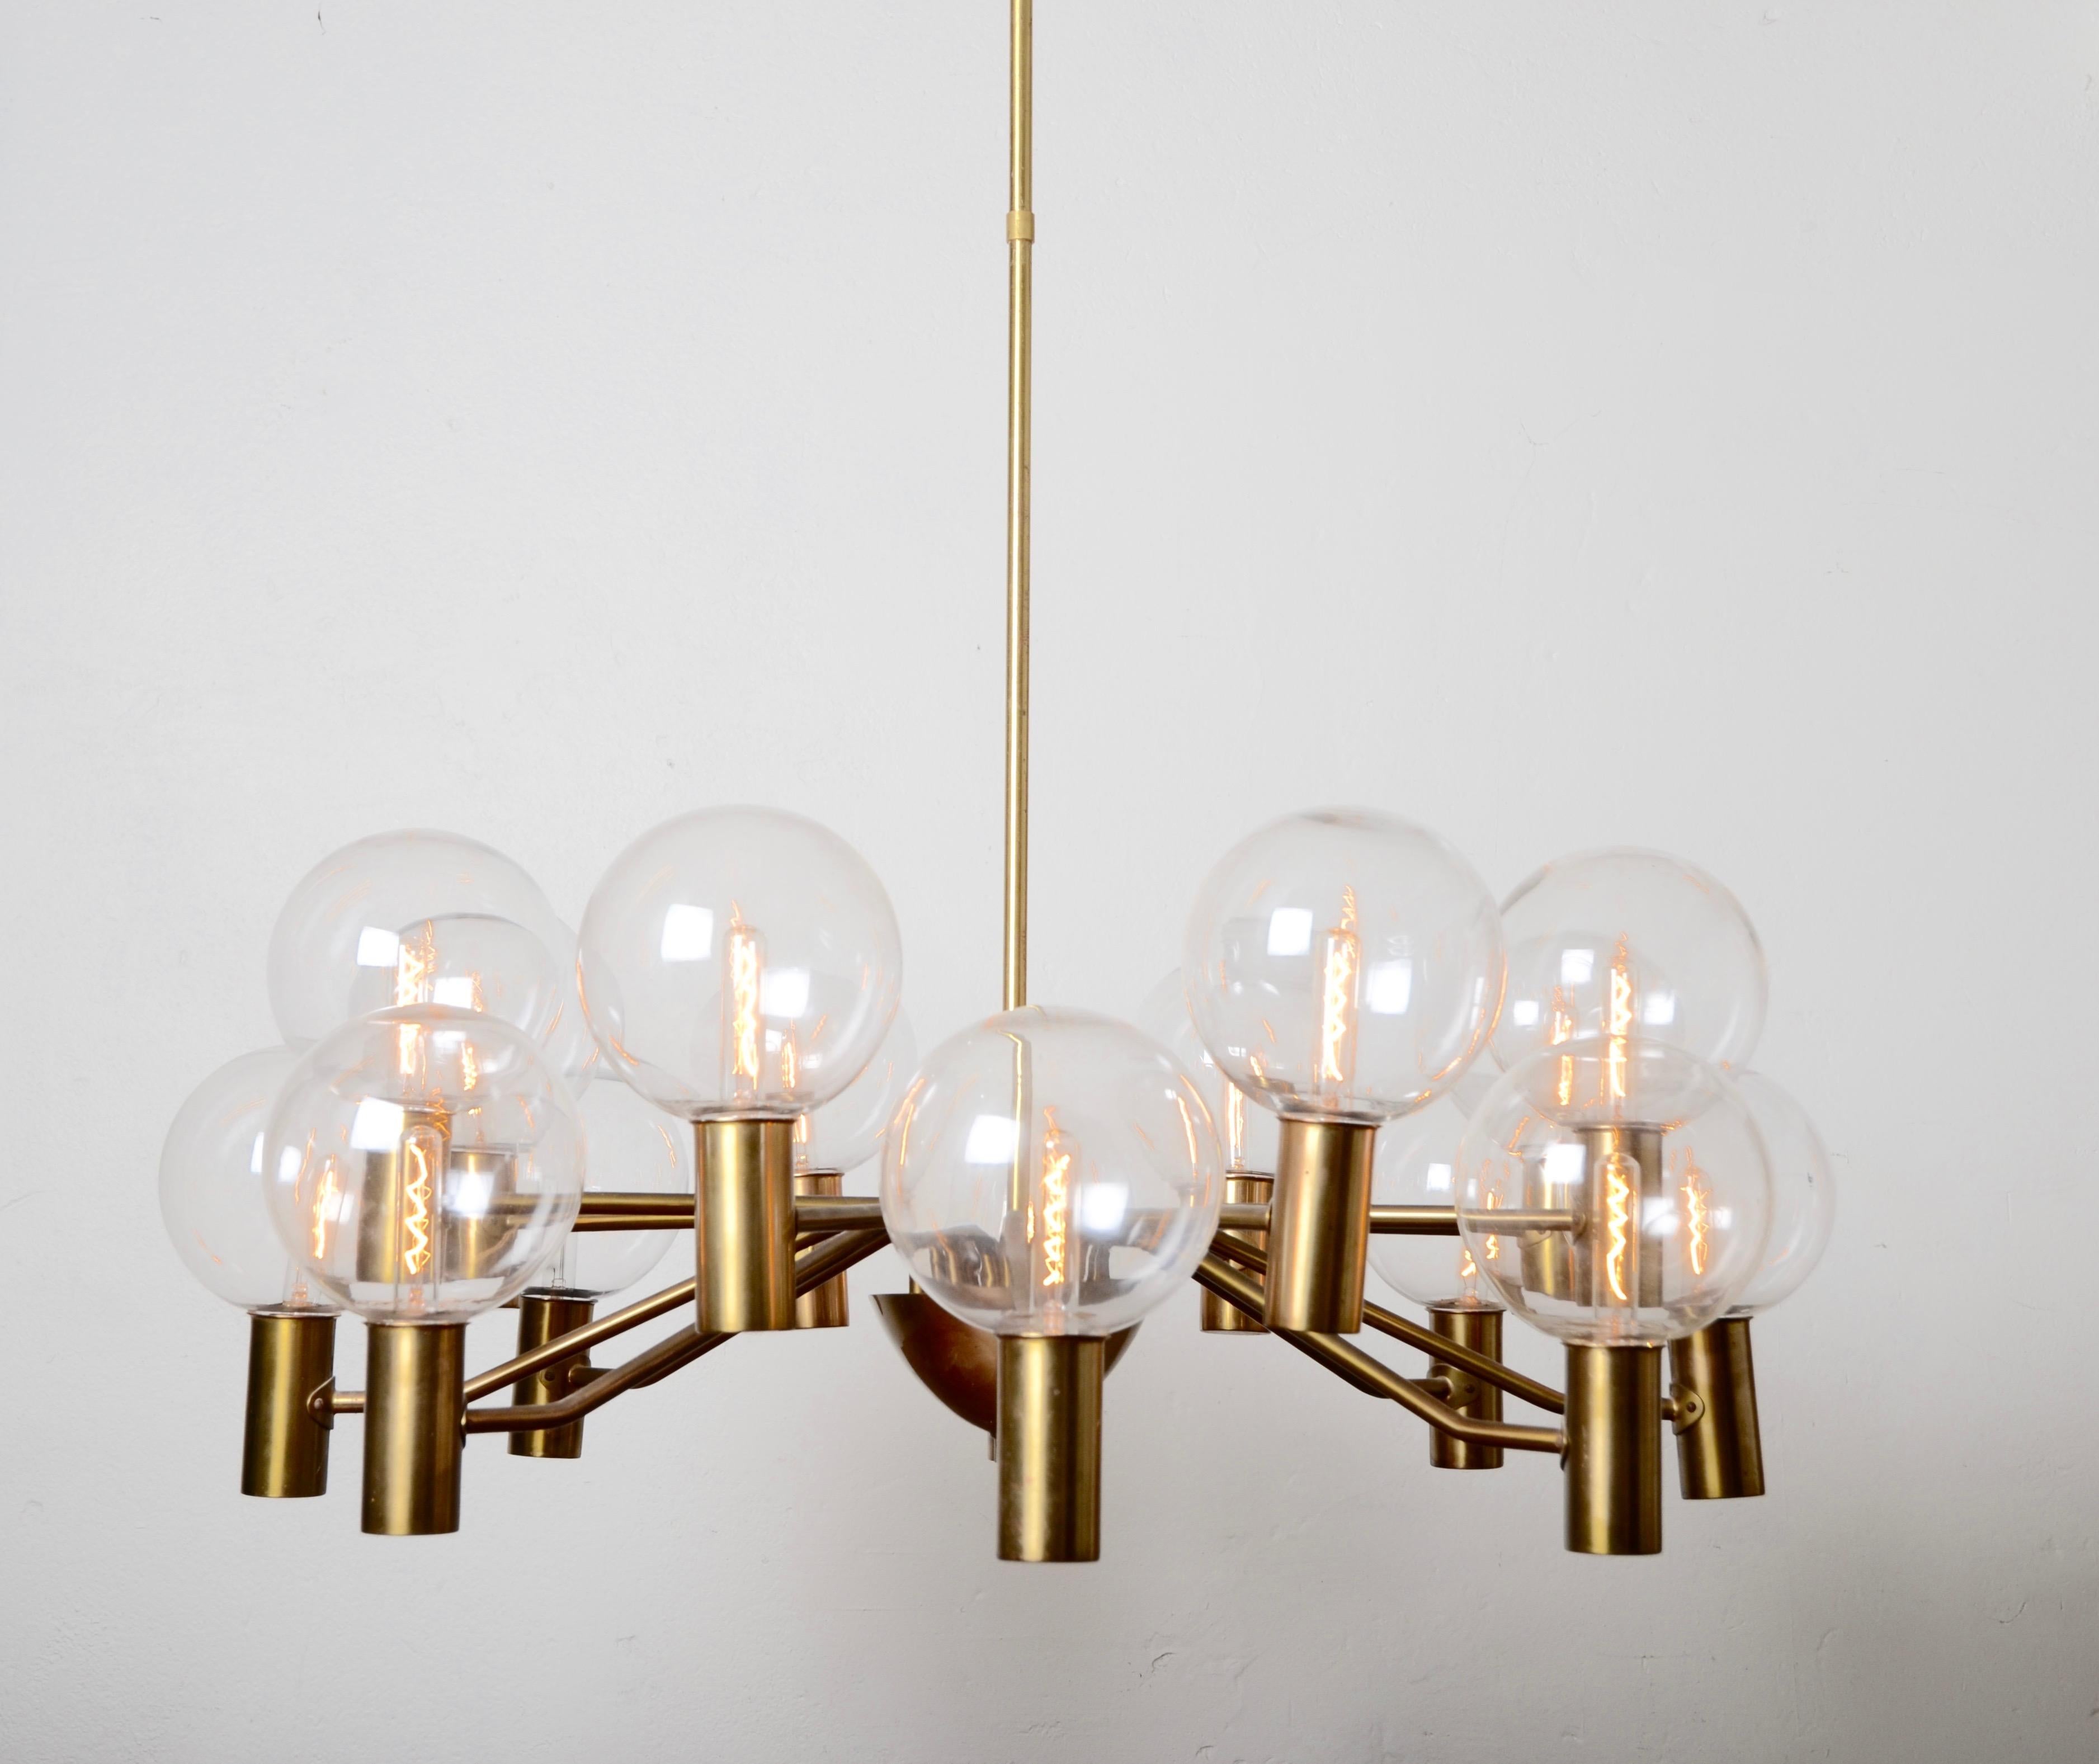 A chandelier in glass and brass, designed by Hans-Agne Jakobsson for Markaryd AB, 1960s-1970s.